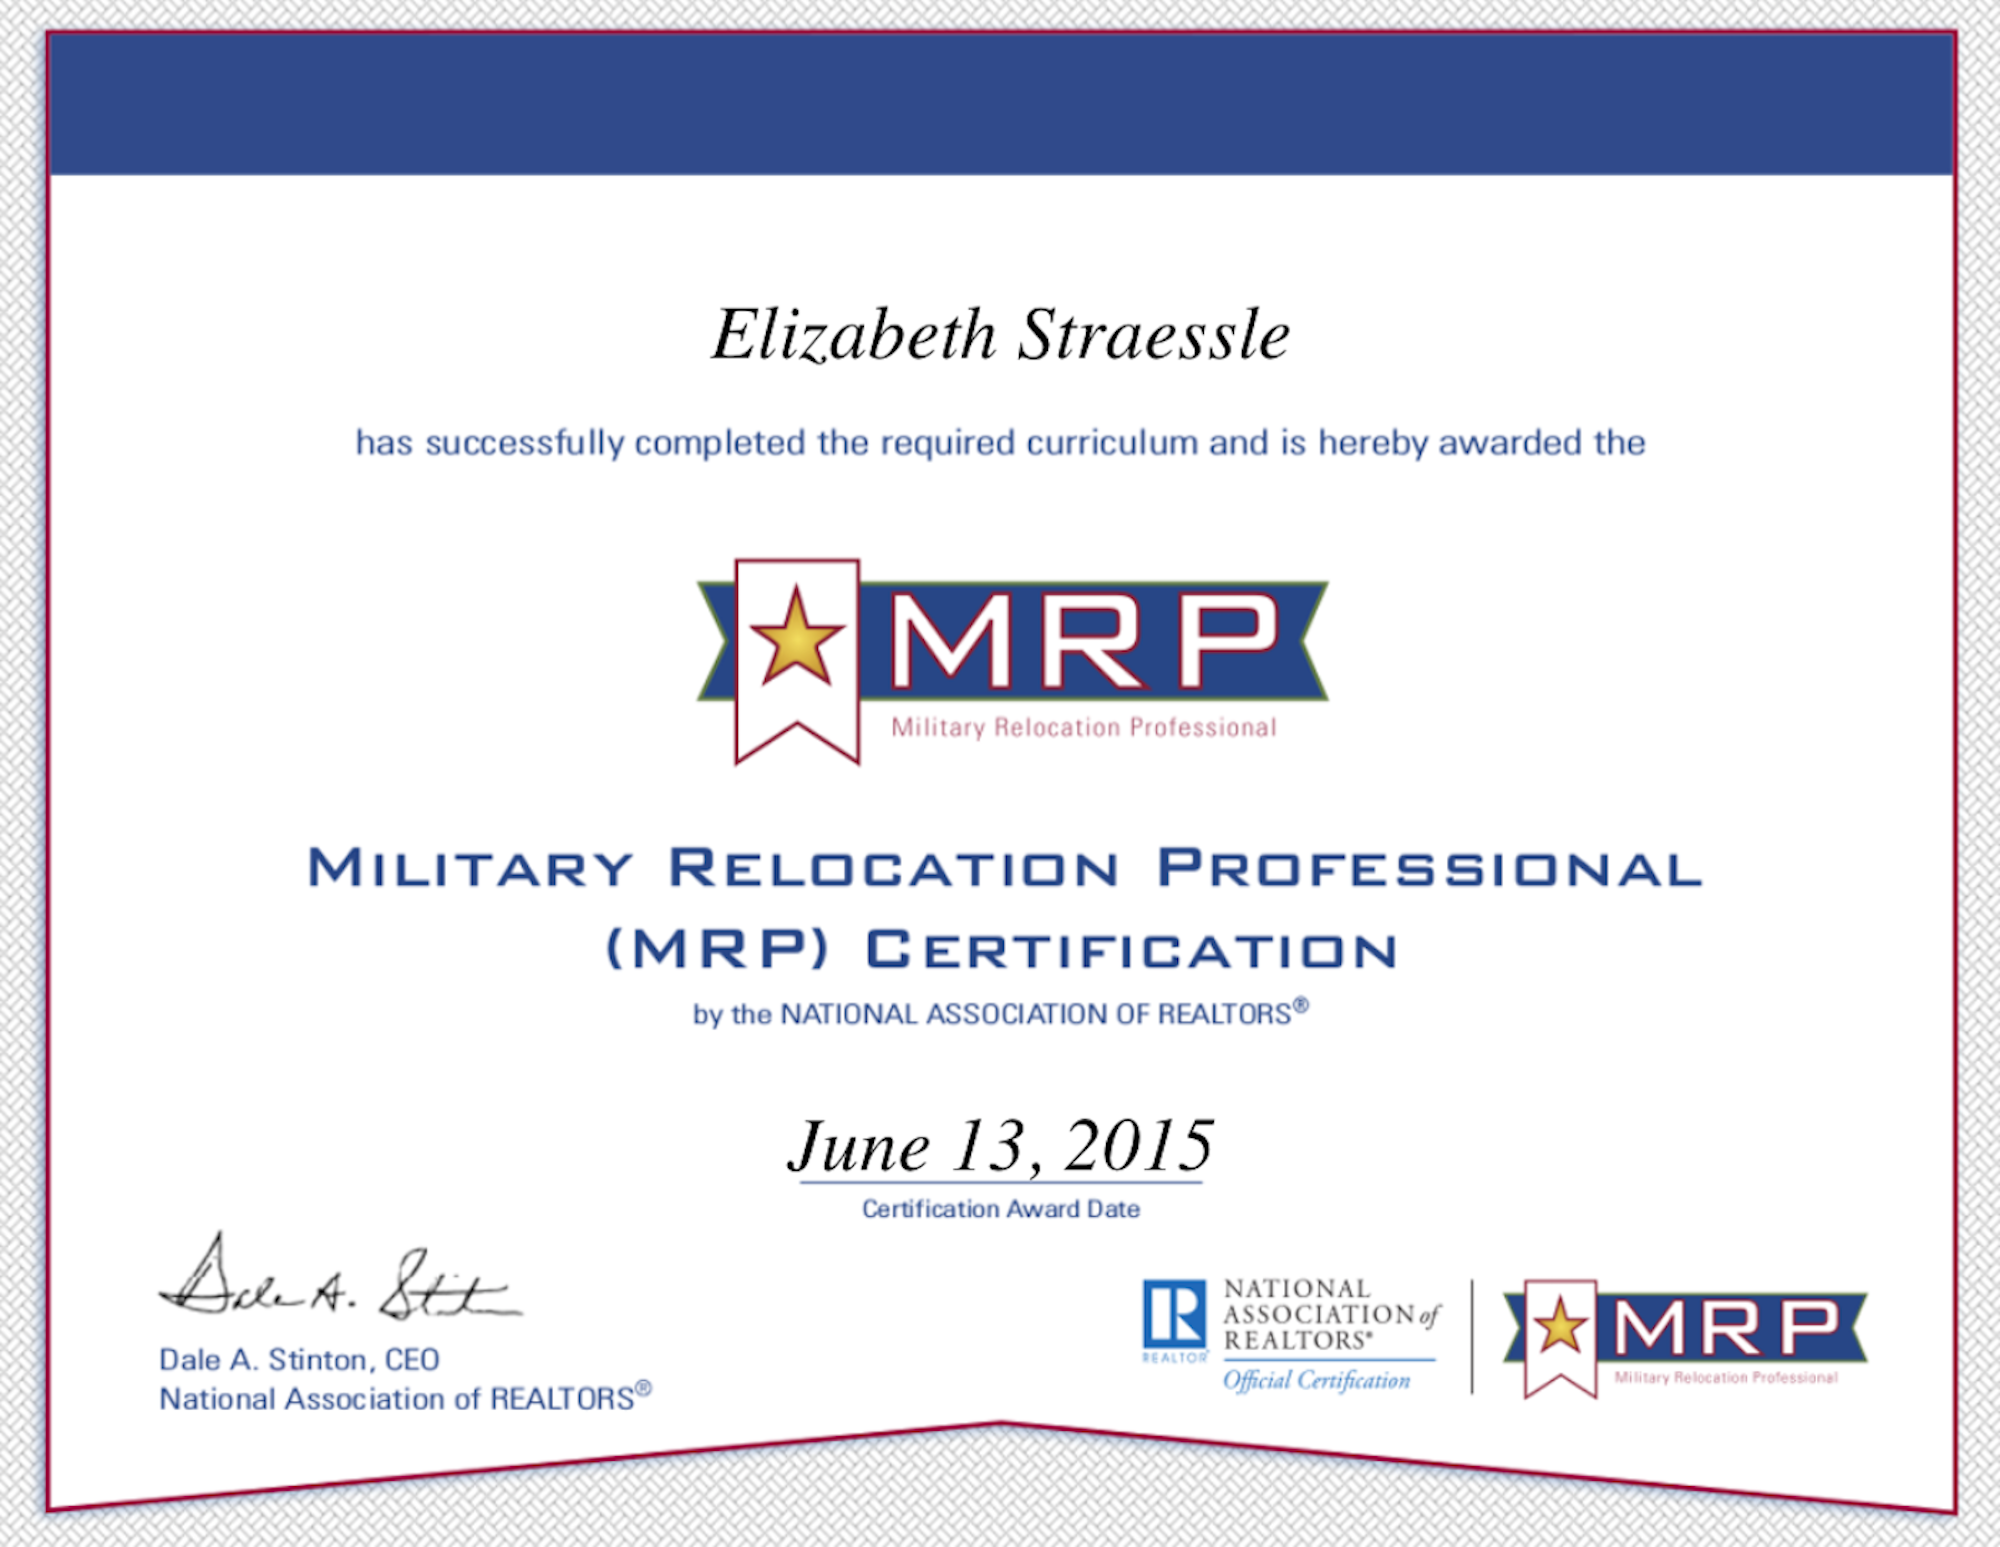 Military Relocation Professional (MRP) Certification